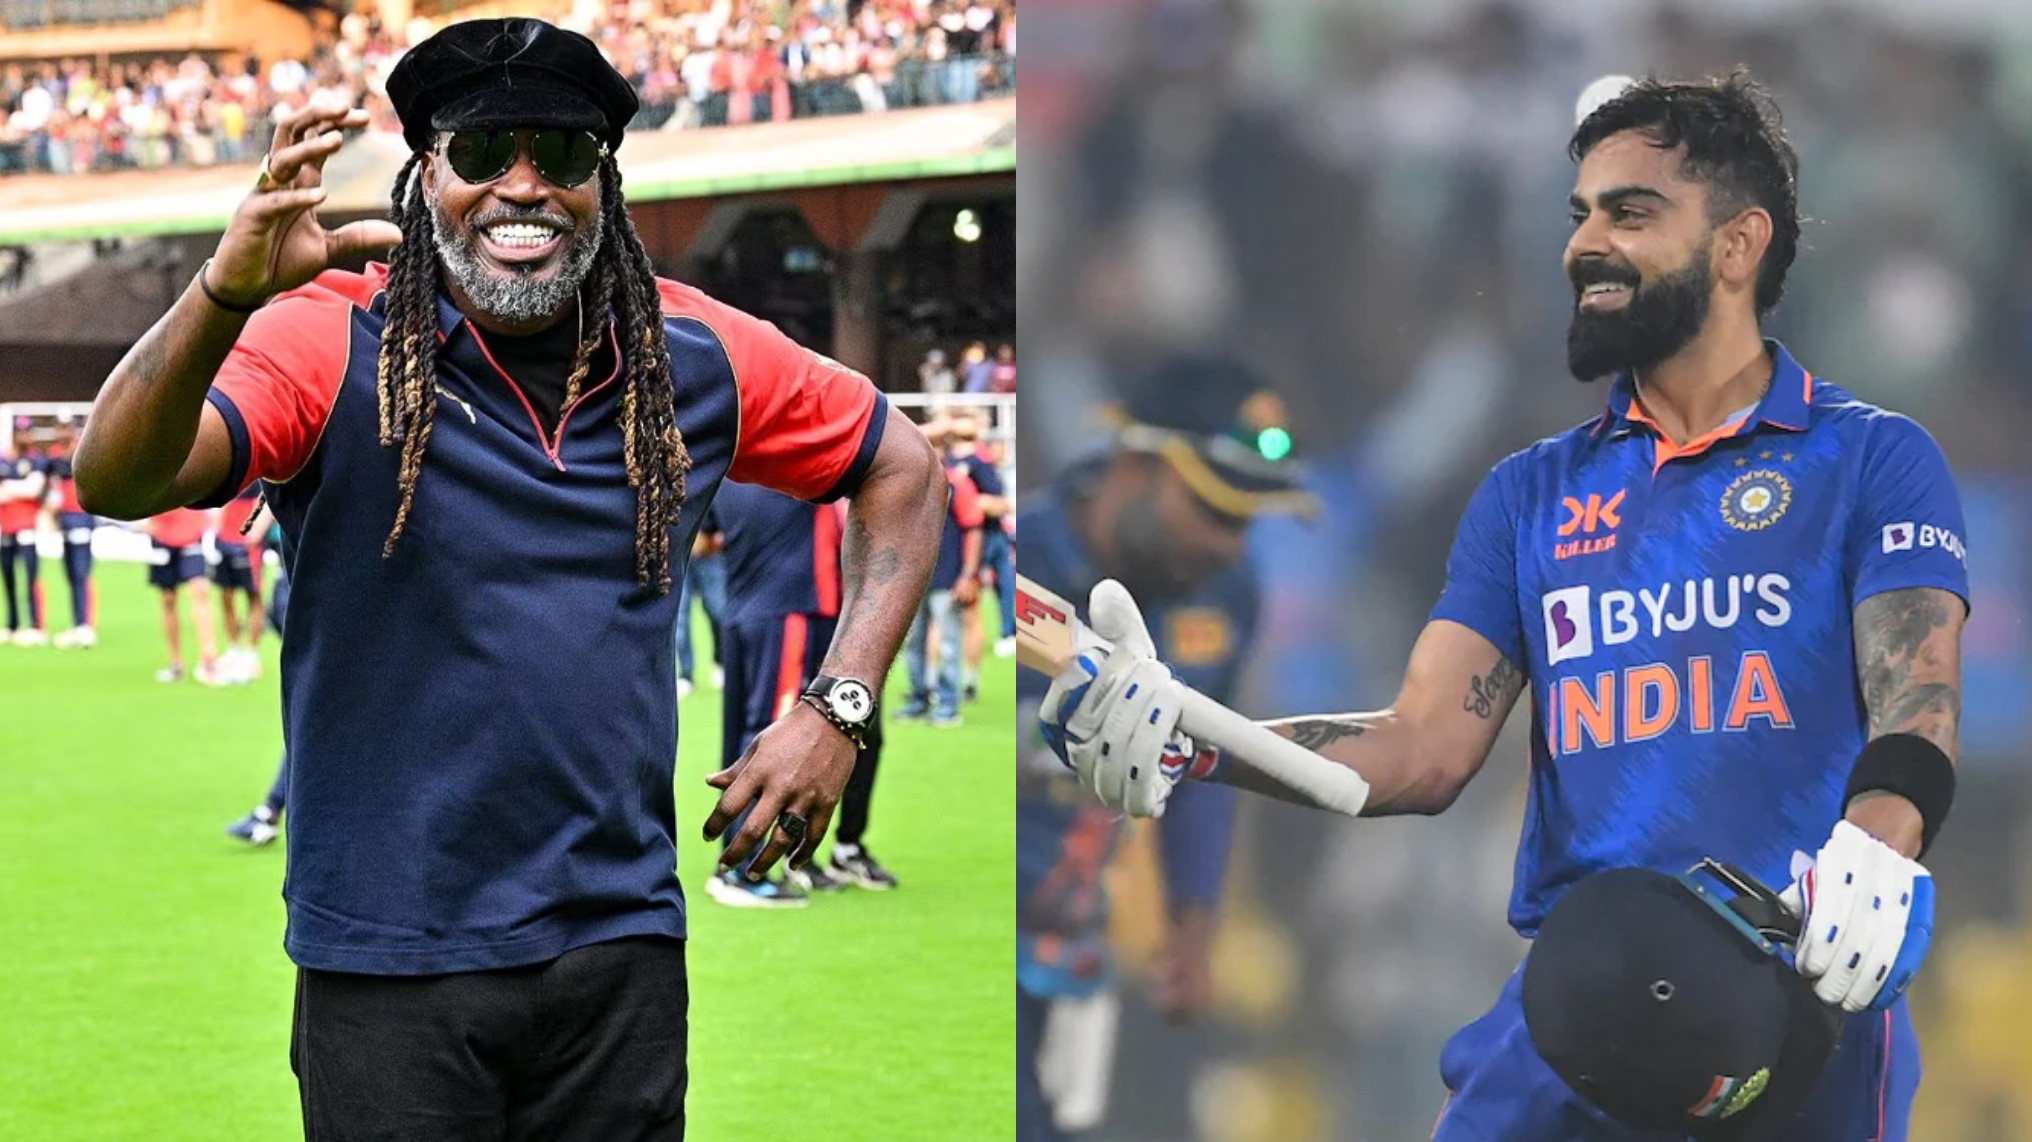 CWC 2023: “He is tough mentally as well physically”- Chris Gayle backs Virat Kohli to dominate in World Cup